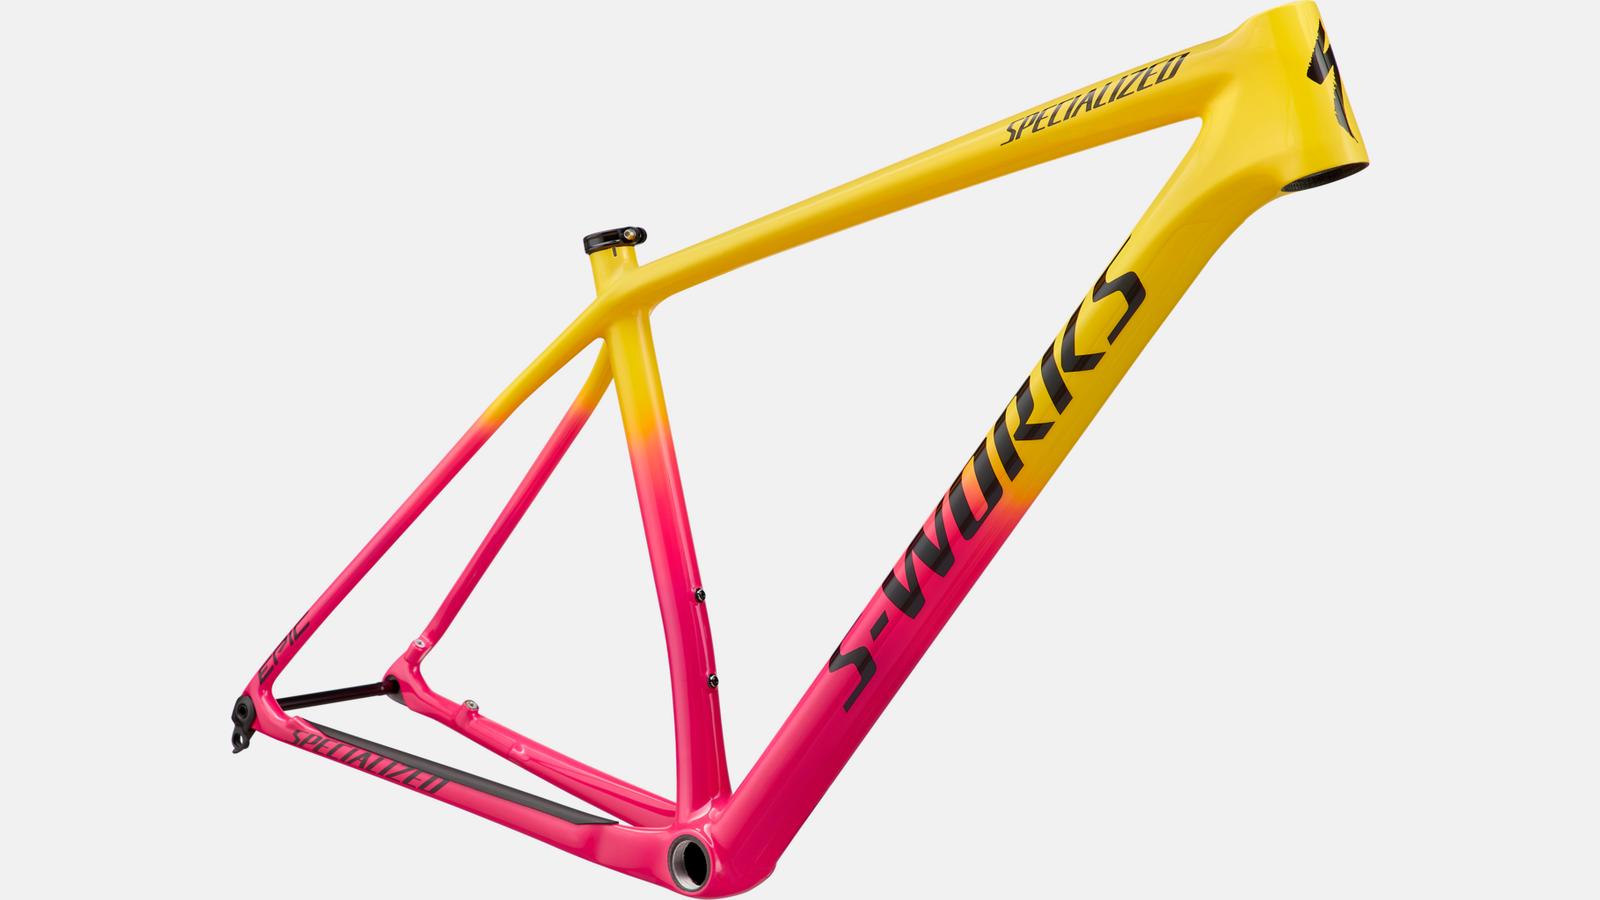 Paint for 2020 Specialized S-Works Epic Hardtail Frameset - Gloss Golden Yellow